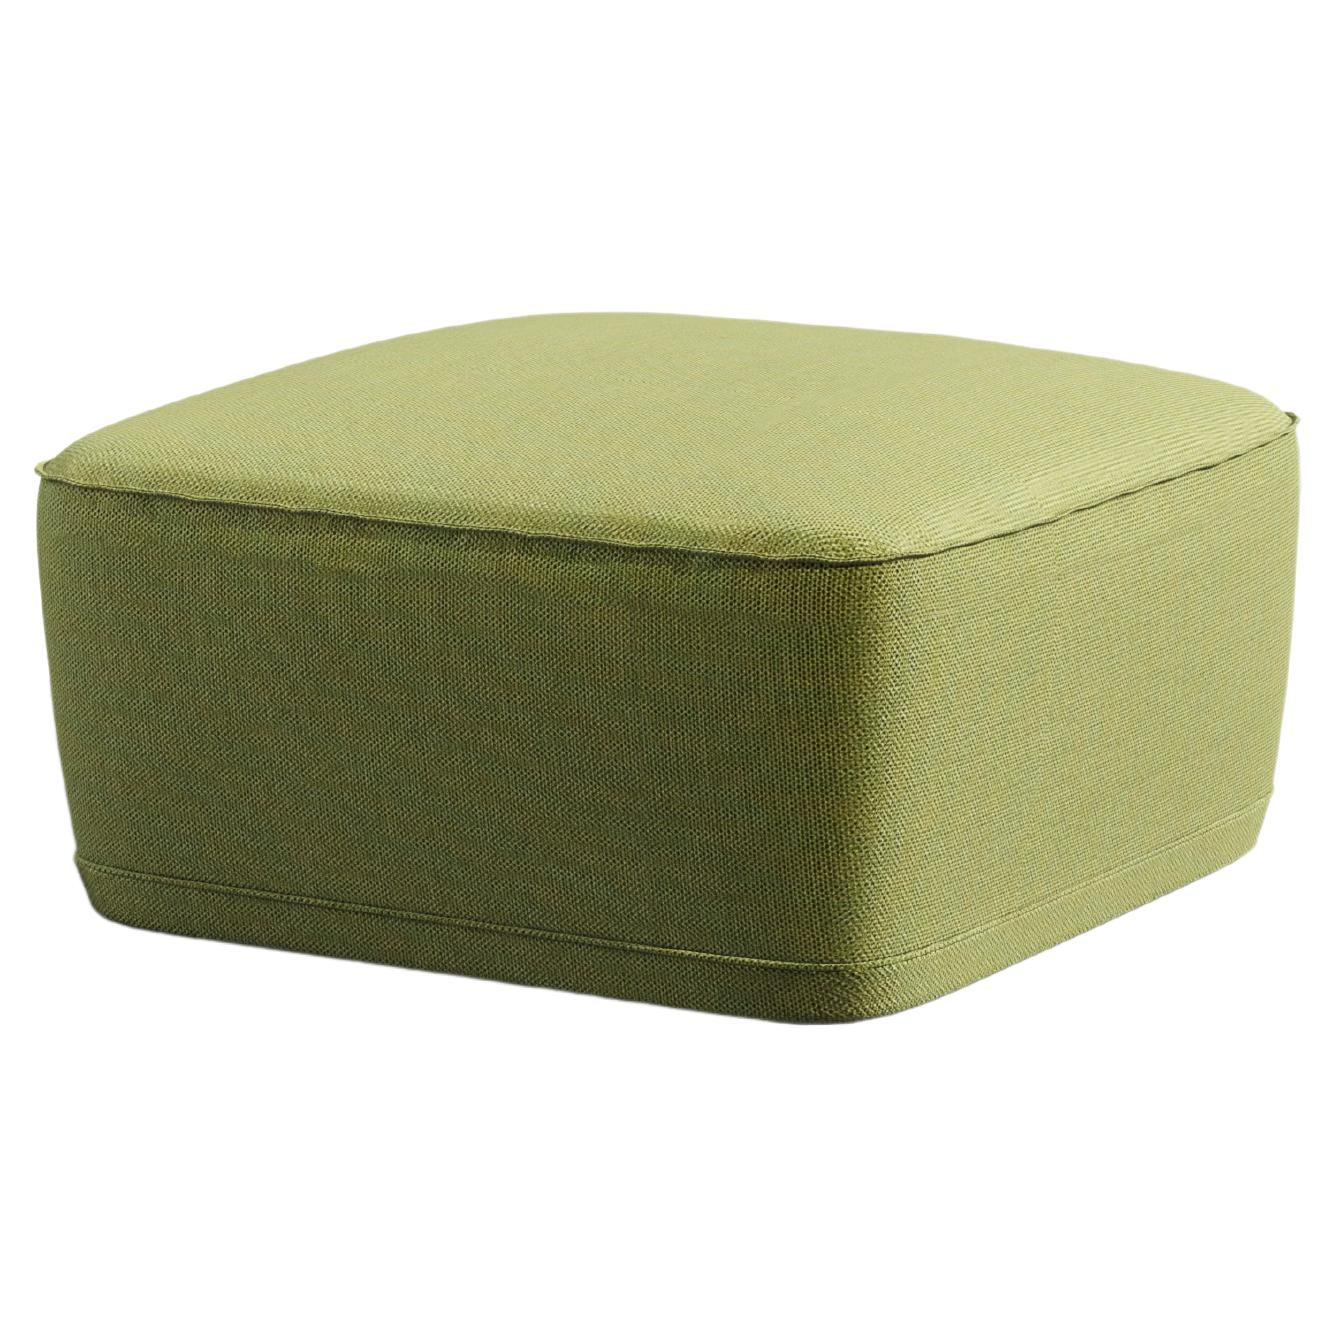 Green Outdoor Ottoman with Upholstery in Weather-Resistant Sunbrella Fabric For Sale